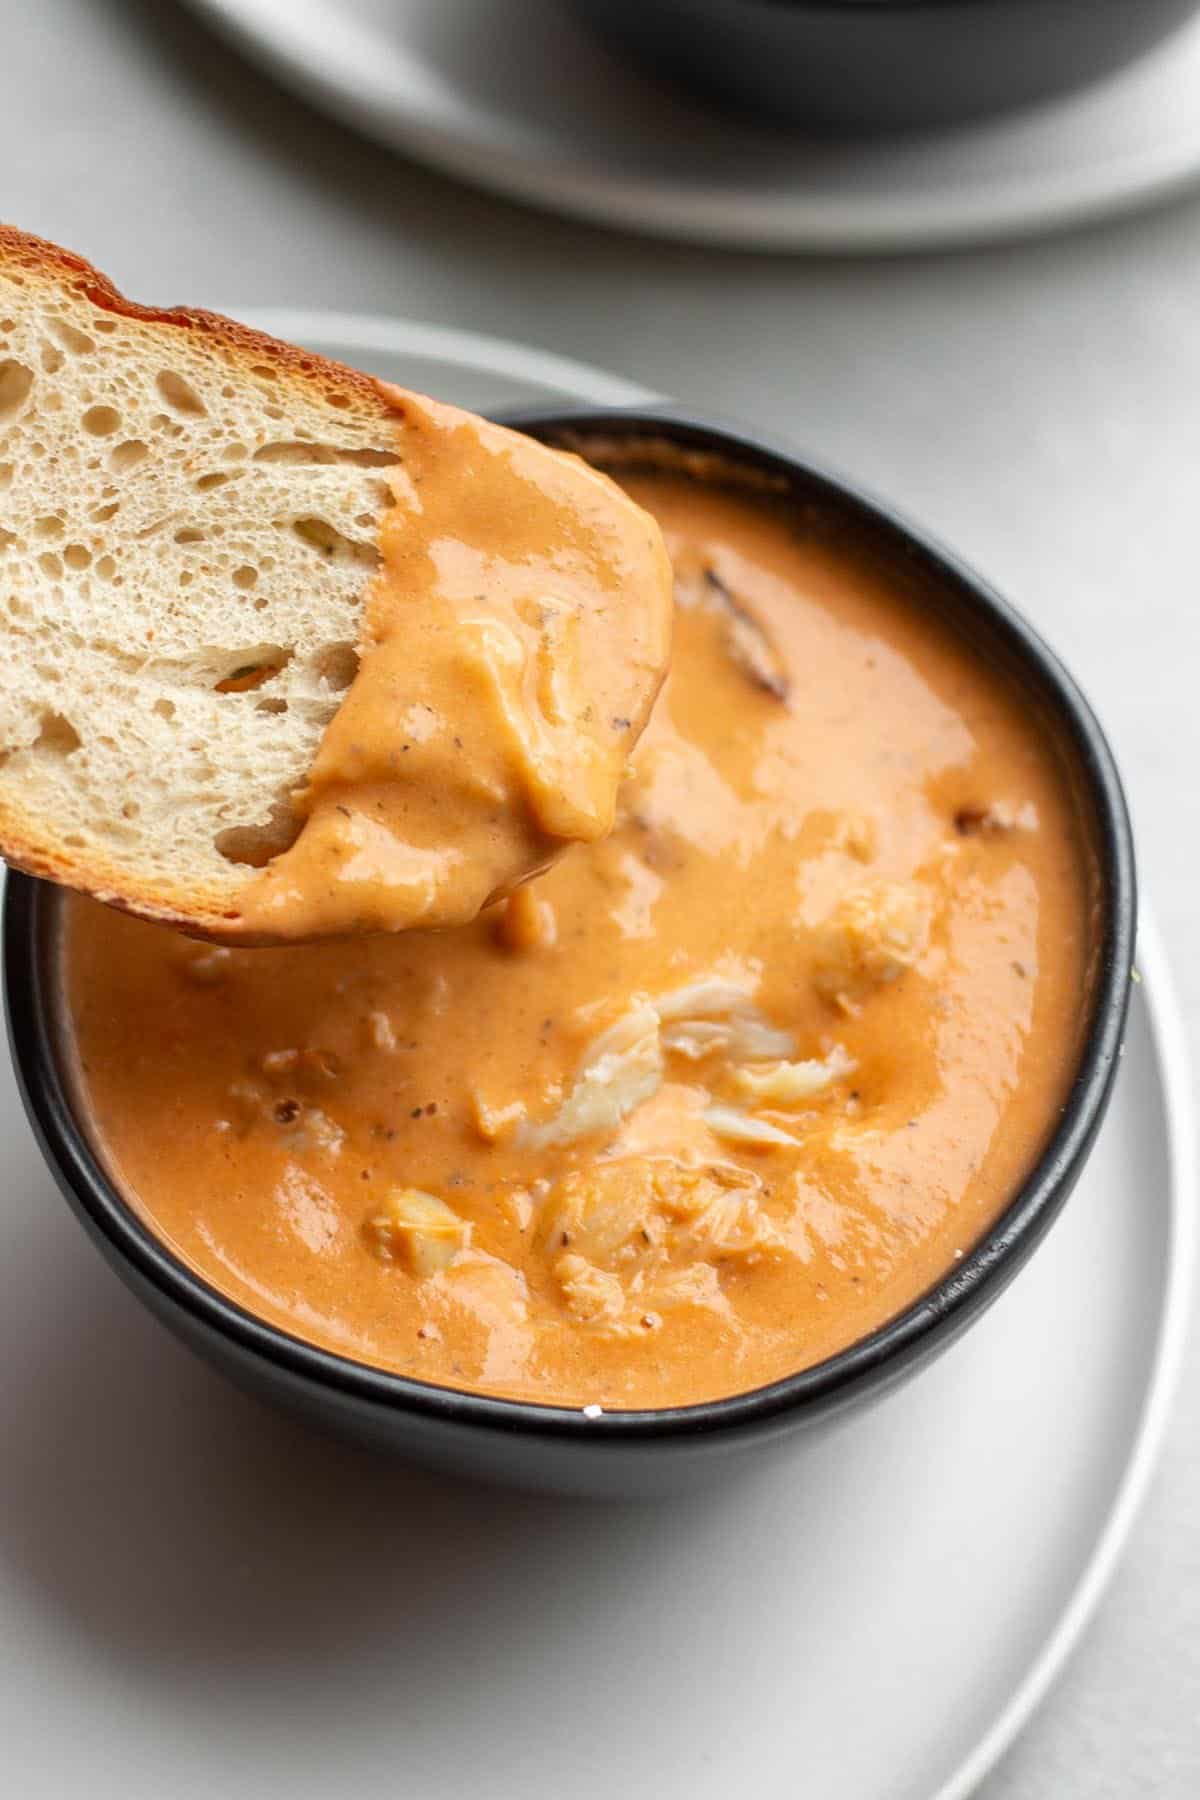 Bowl of creamy crab bisque soup with crusty bread being dipped in.